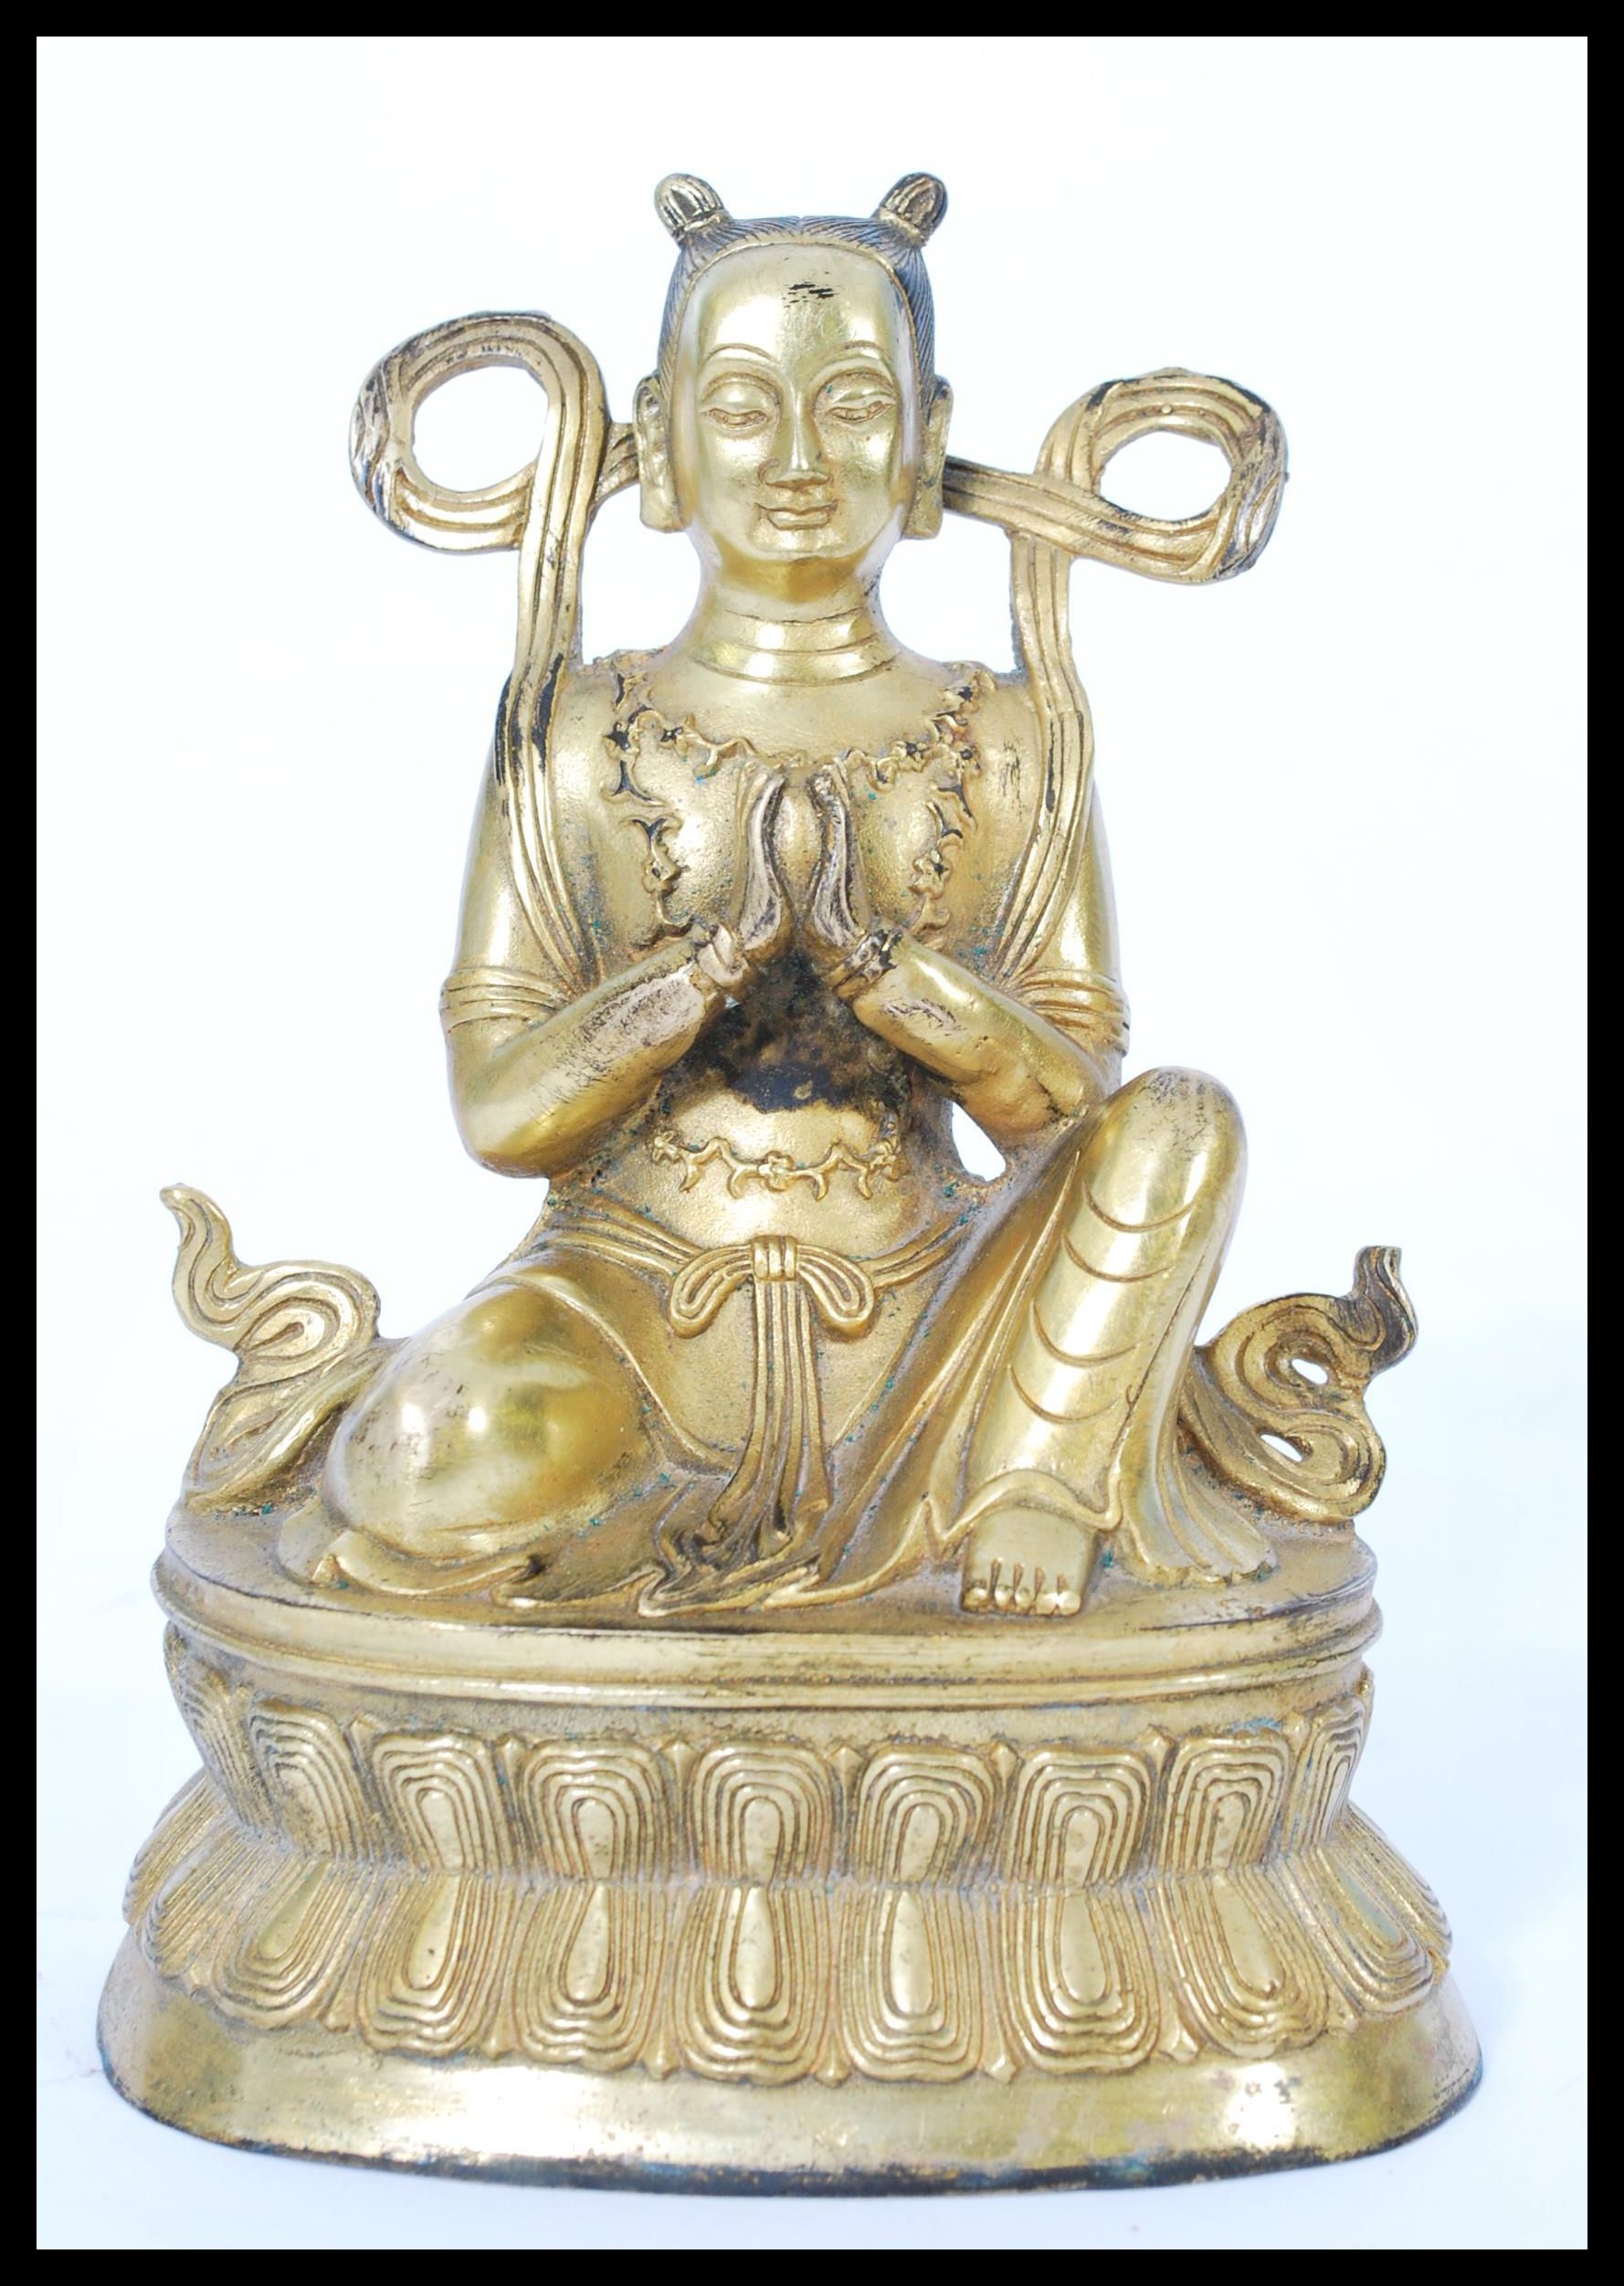 A 19th century gilt bronze statue of a Buddha raised on pedestal base with scrolled robe and - Image 3 of 4